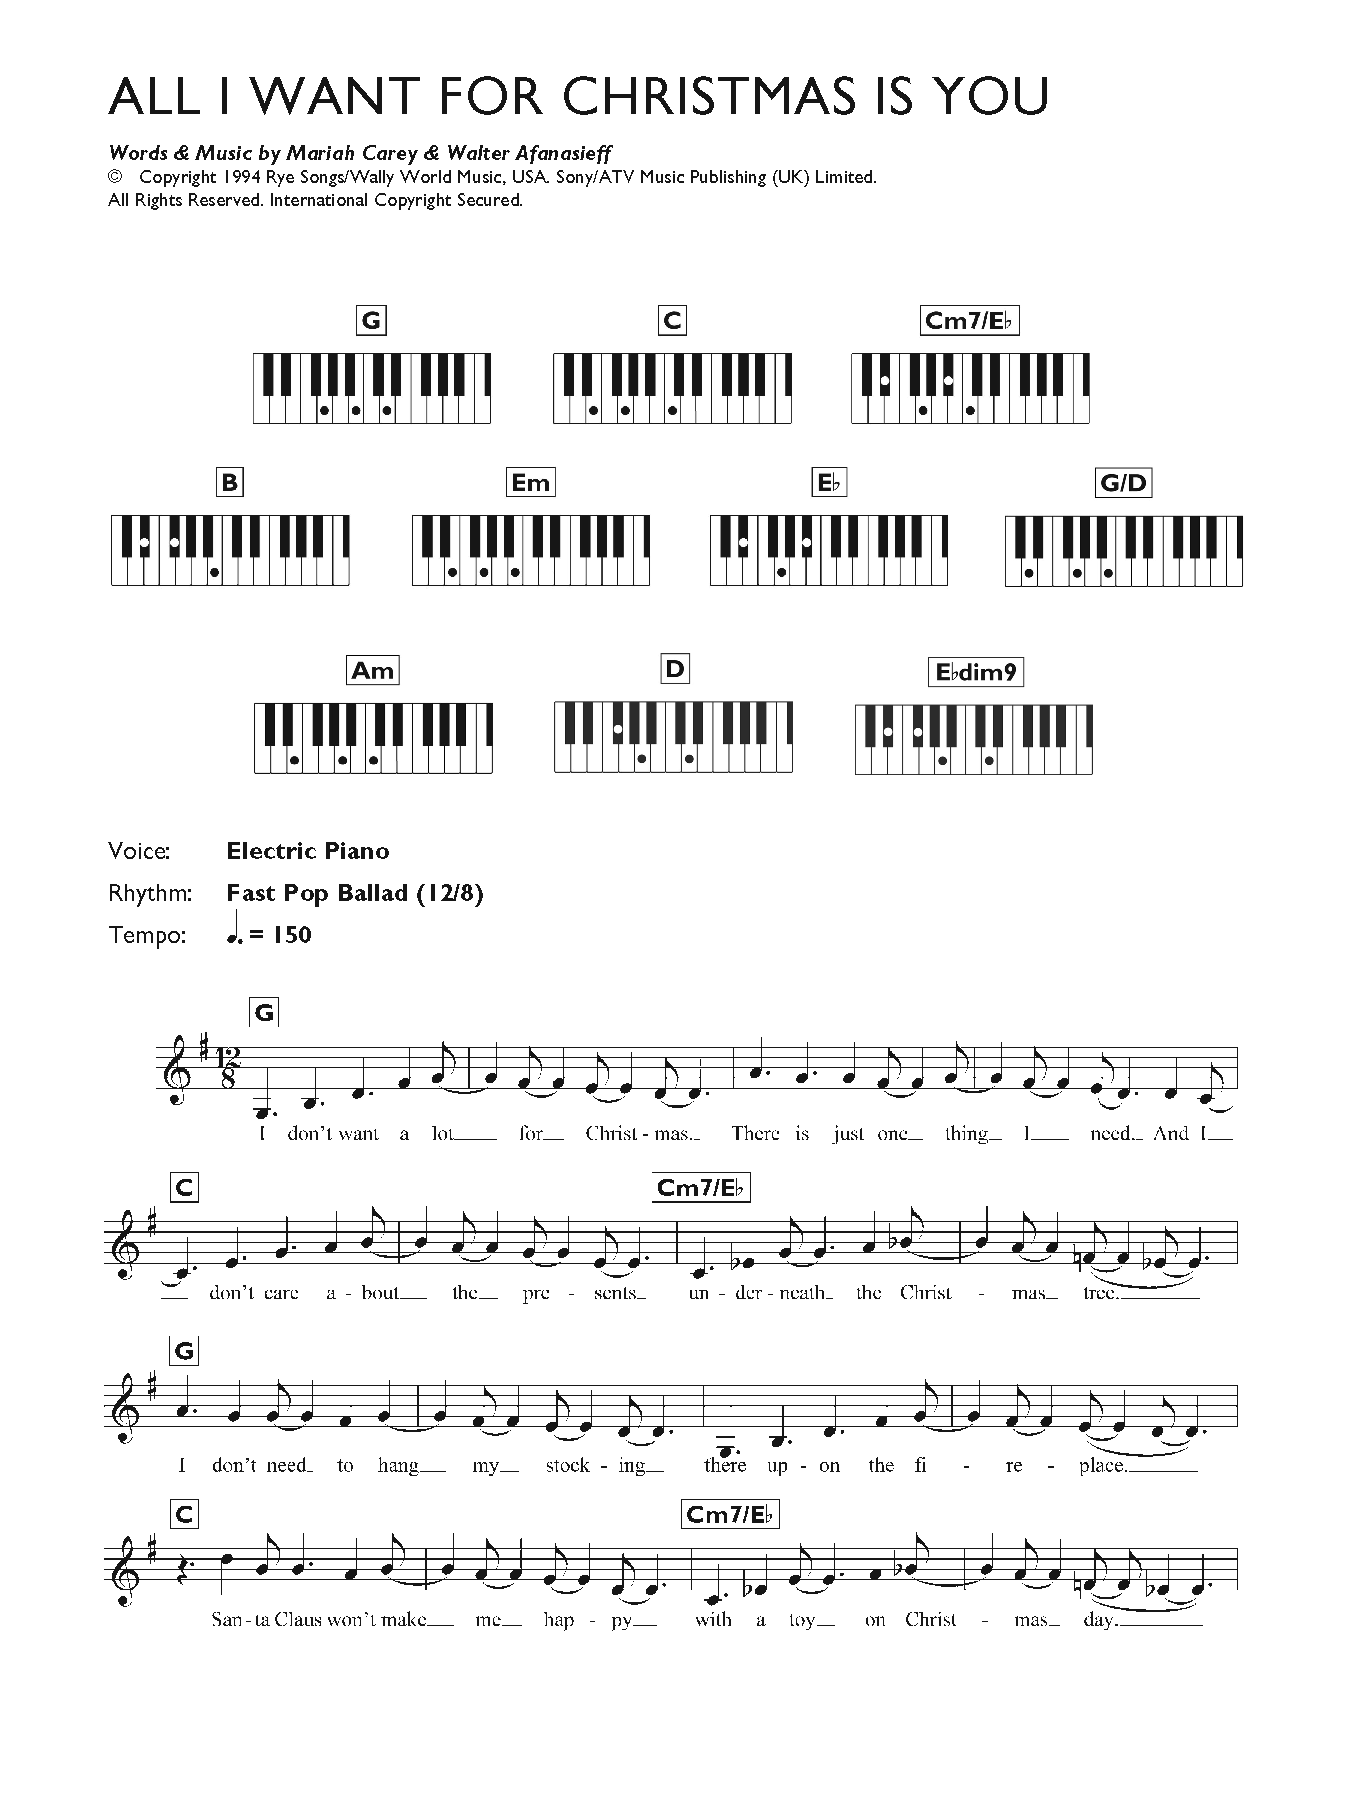 Mariah Carey All I Want For Christmas Is You sheet music notes and chords. Download Printable PDF.